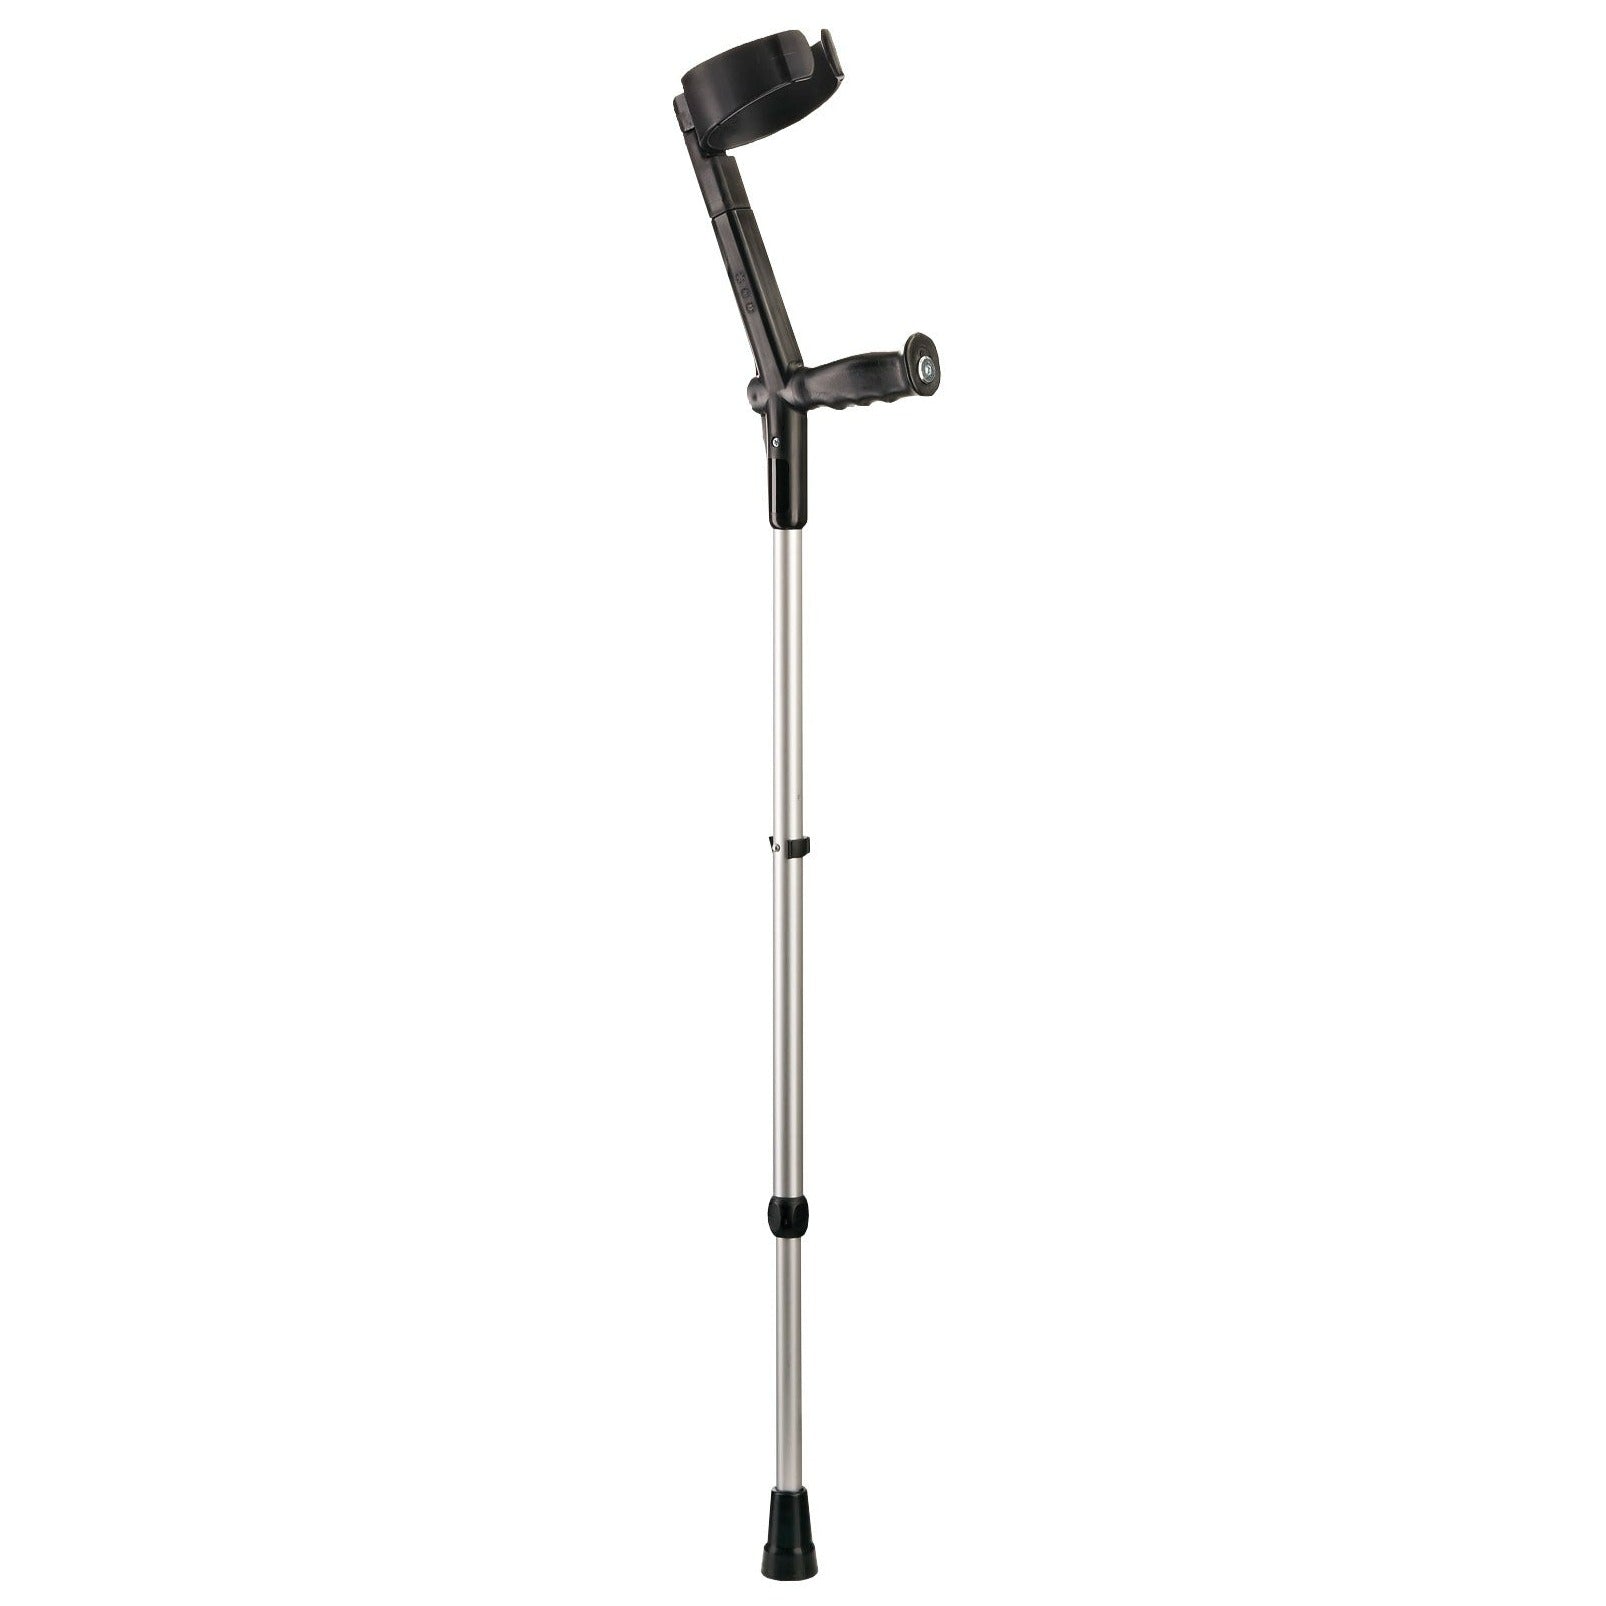 Tall Forearm Crutches - Safe-In-Excess Length